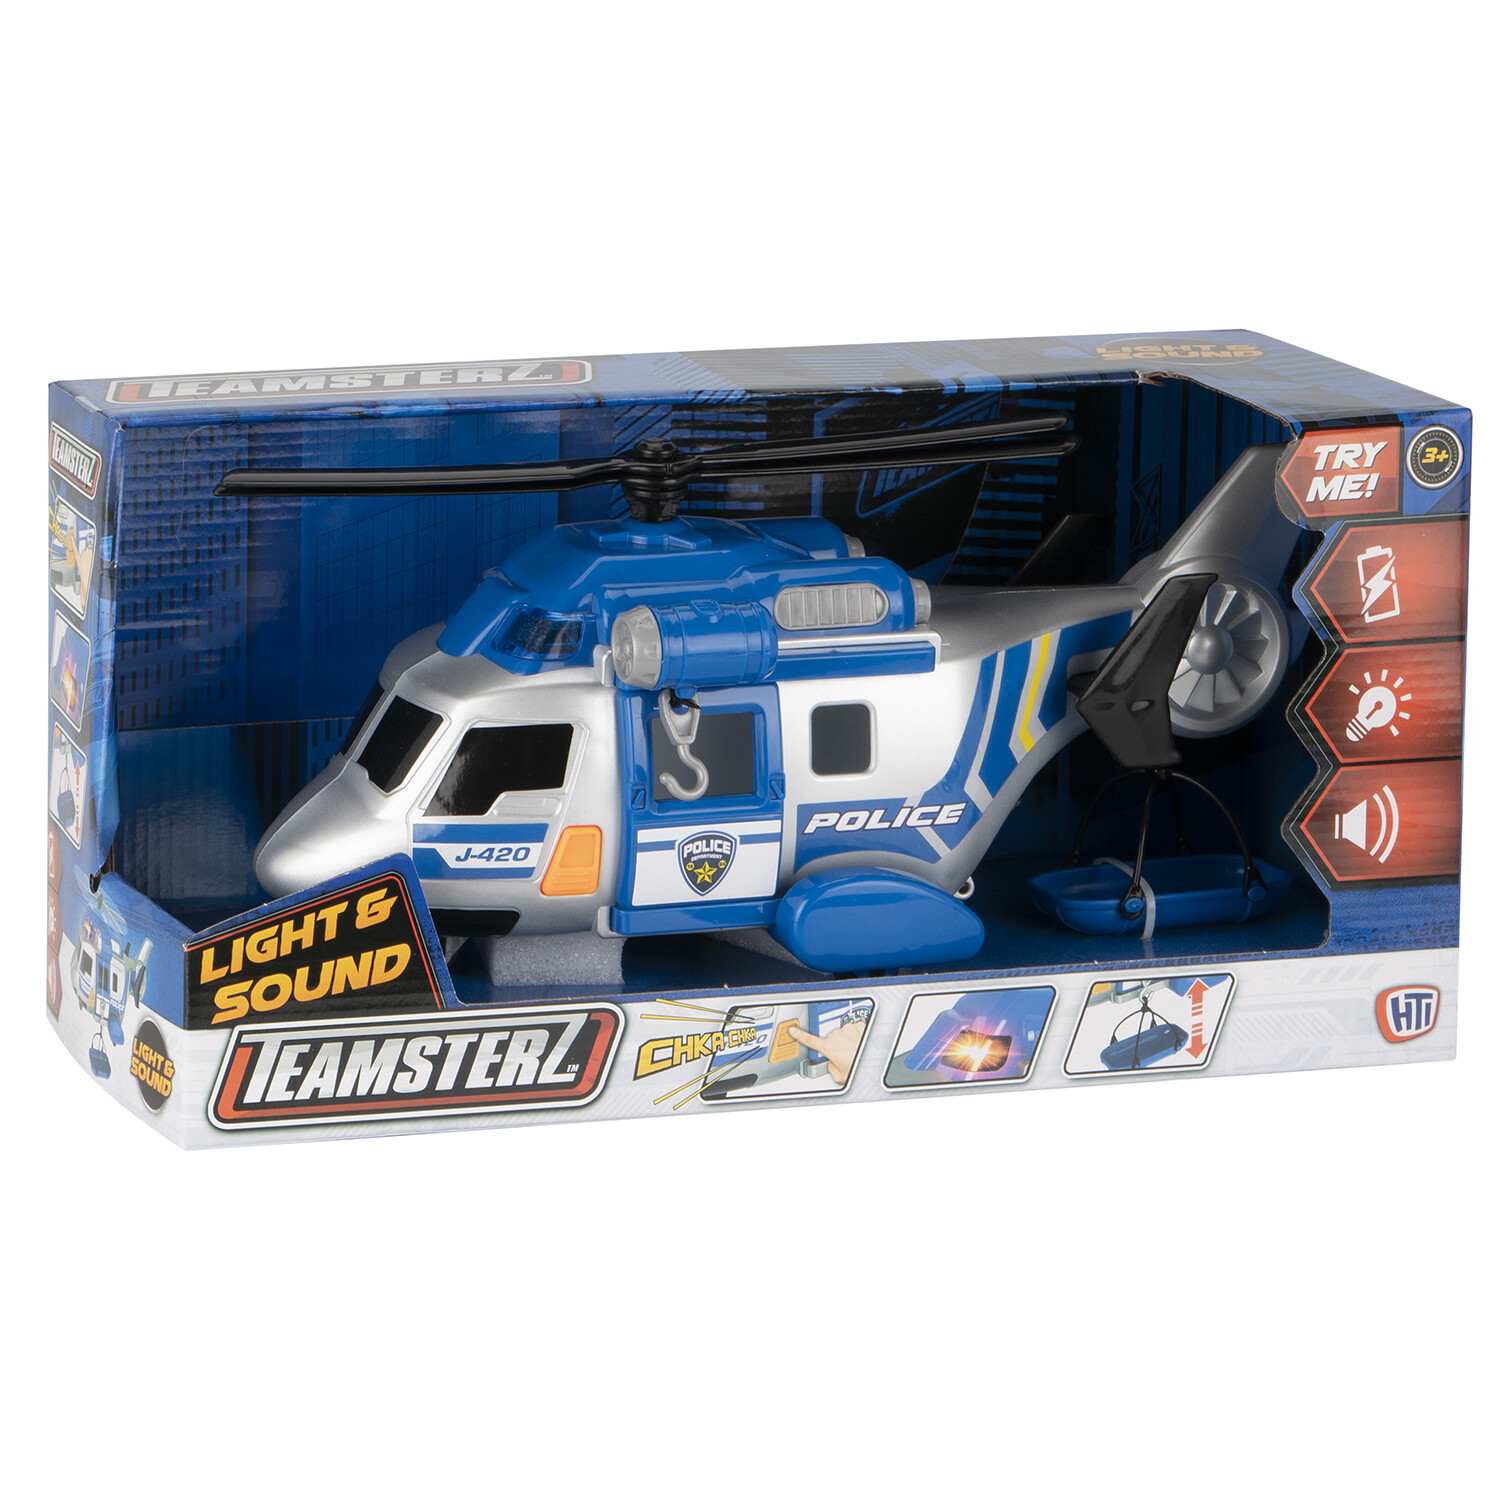 Teamsterz Light and Sound Police Rescue Helicopter Toy Image 1